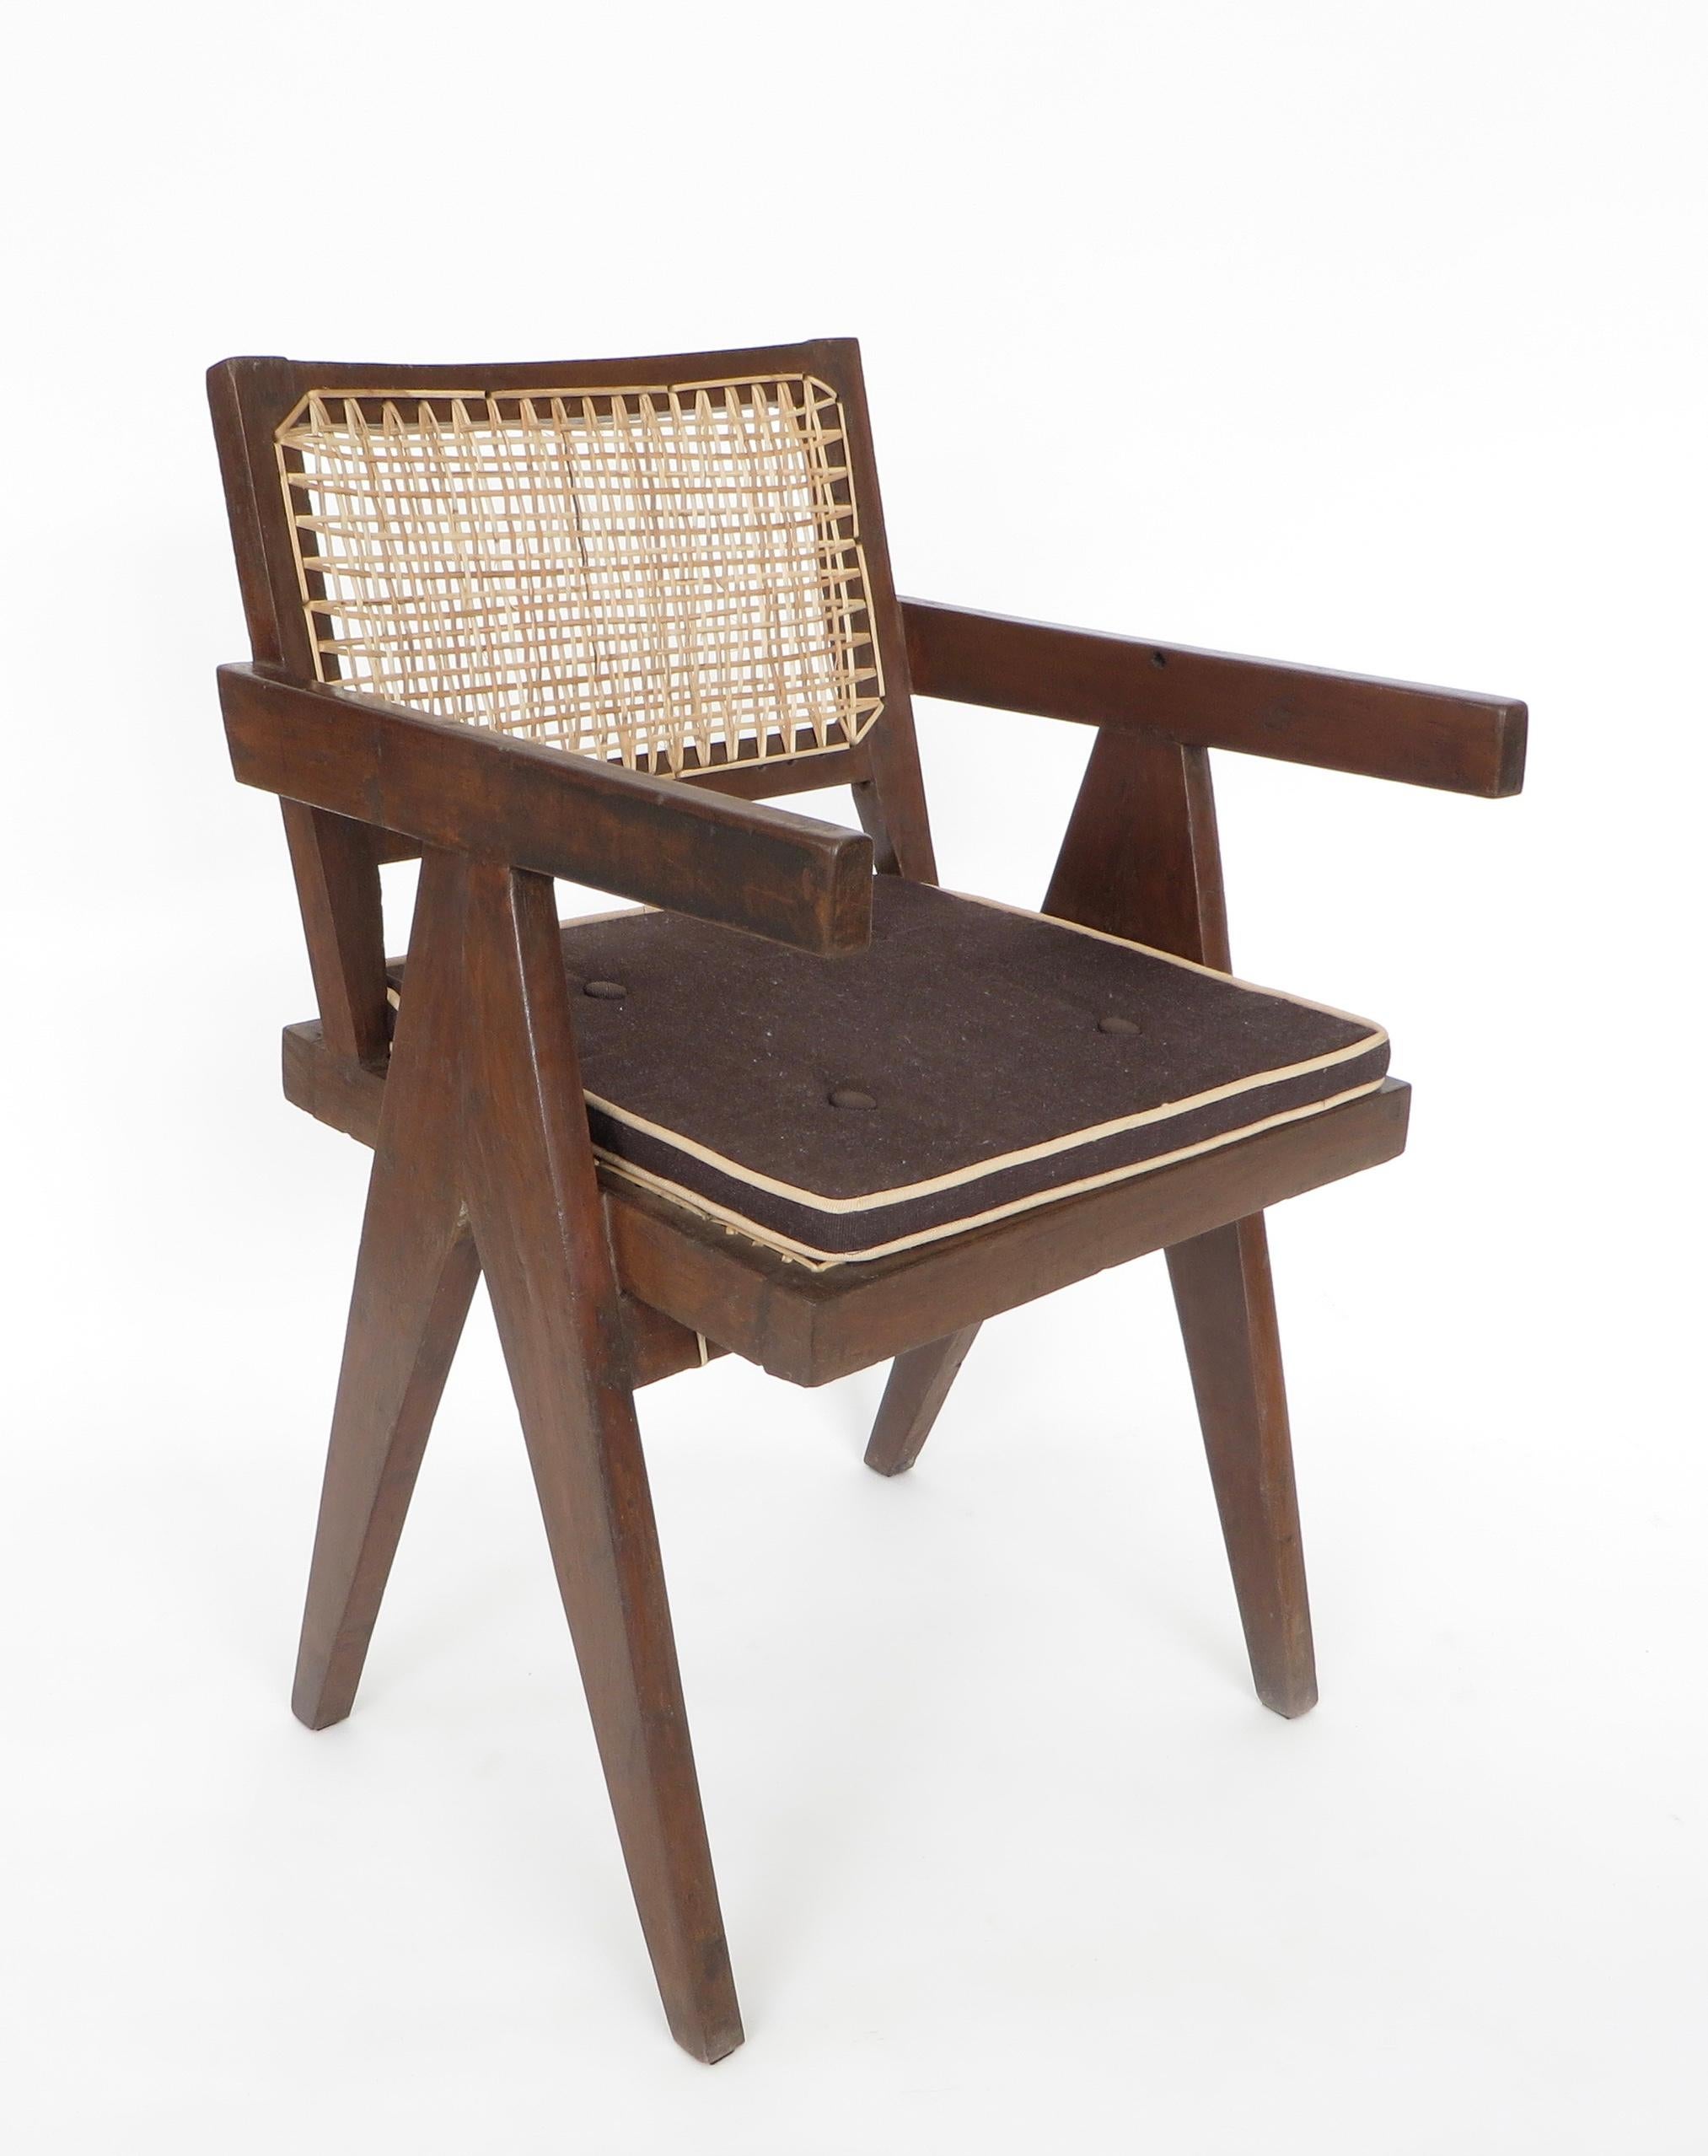 Pierre Jeanneret Teak and Cane Office Vintage Original Armchair from Chandigarh 7